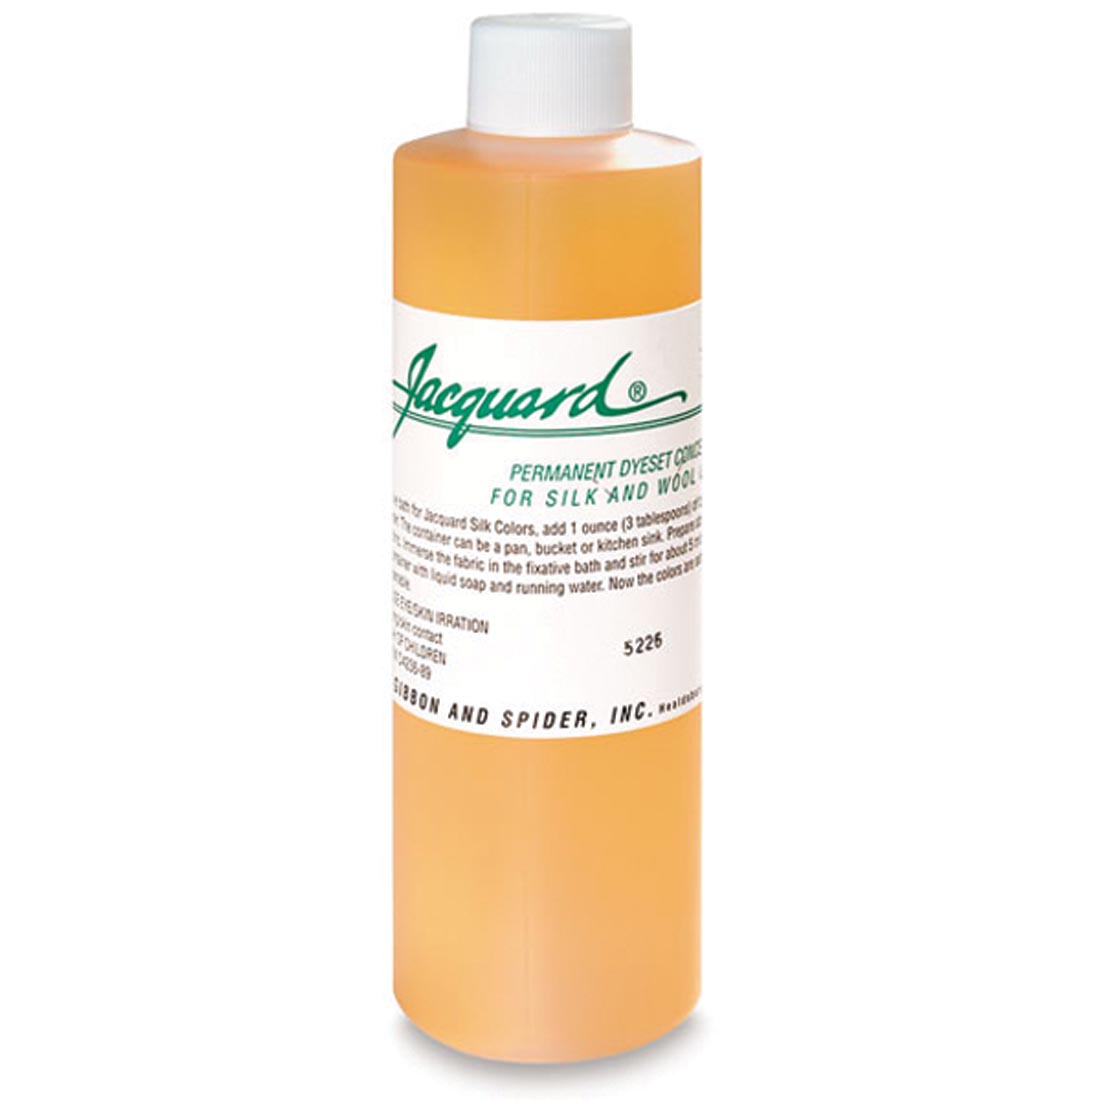 Jacquard Permanent Dyeset Concentrate for Silk and Wool